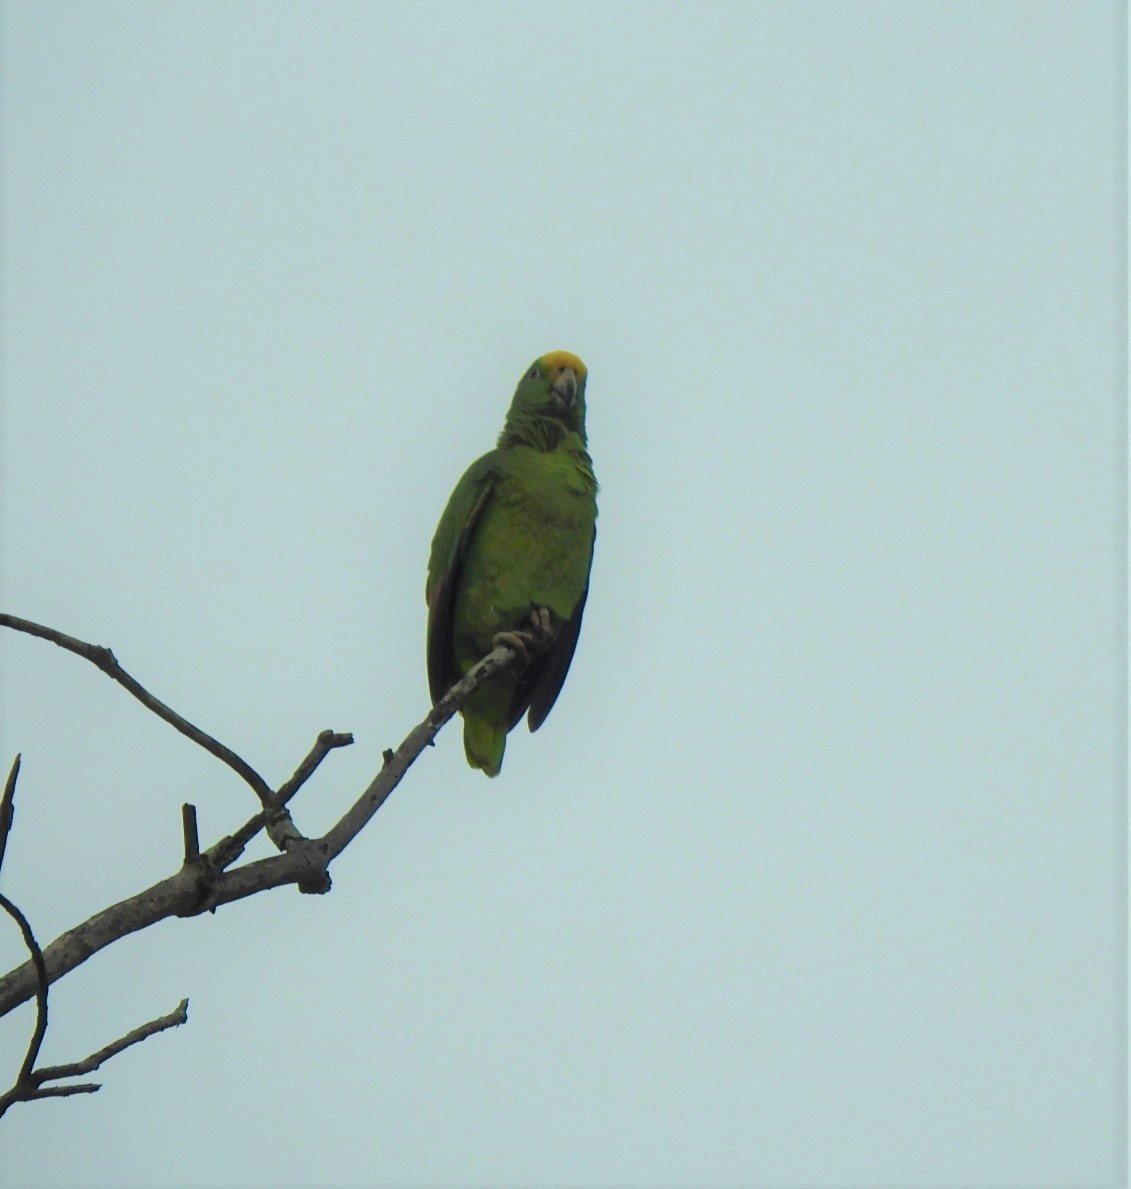 Yellow-crowned Parrot - Jin Park